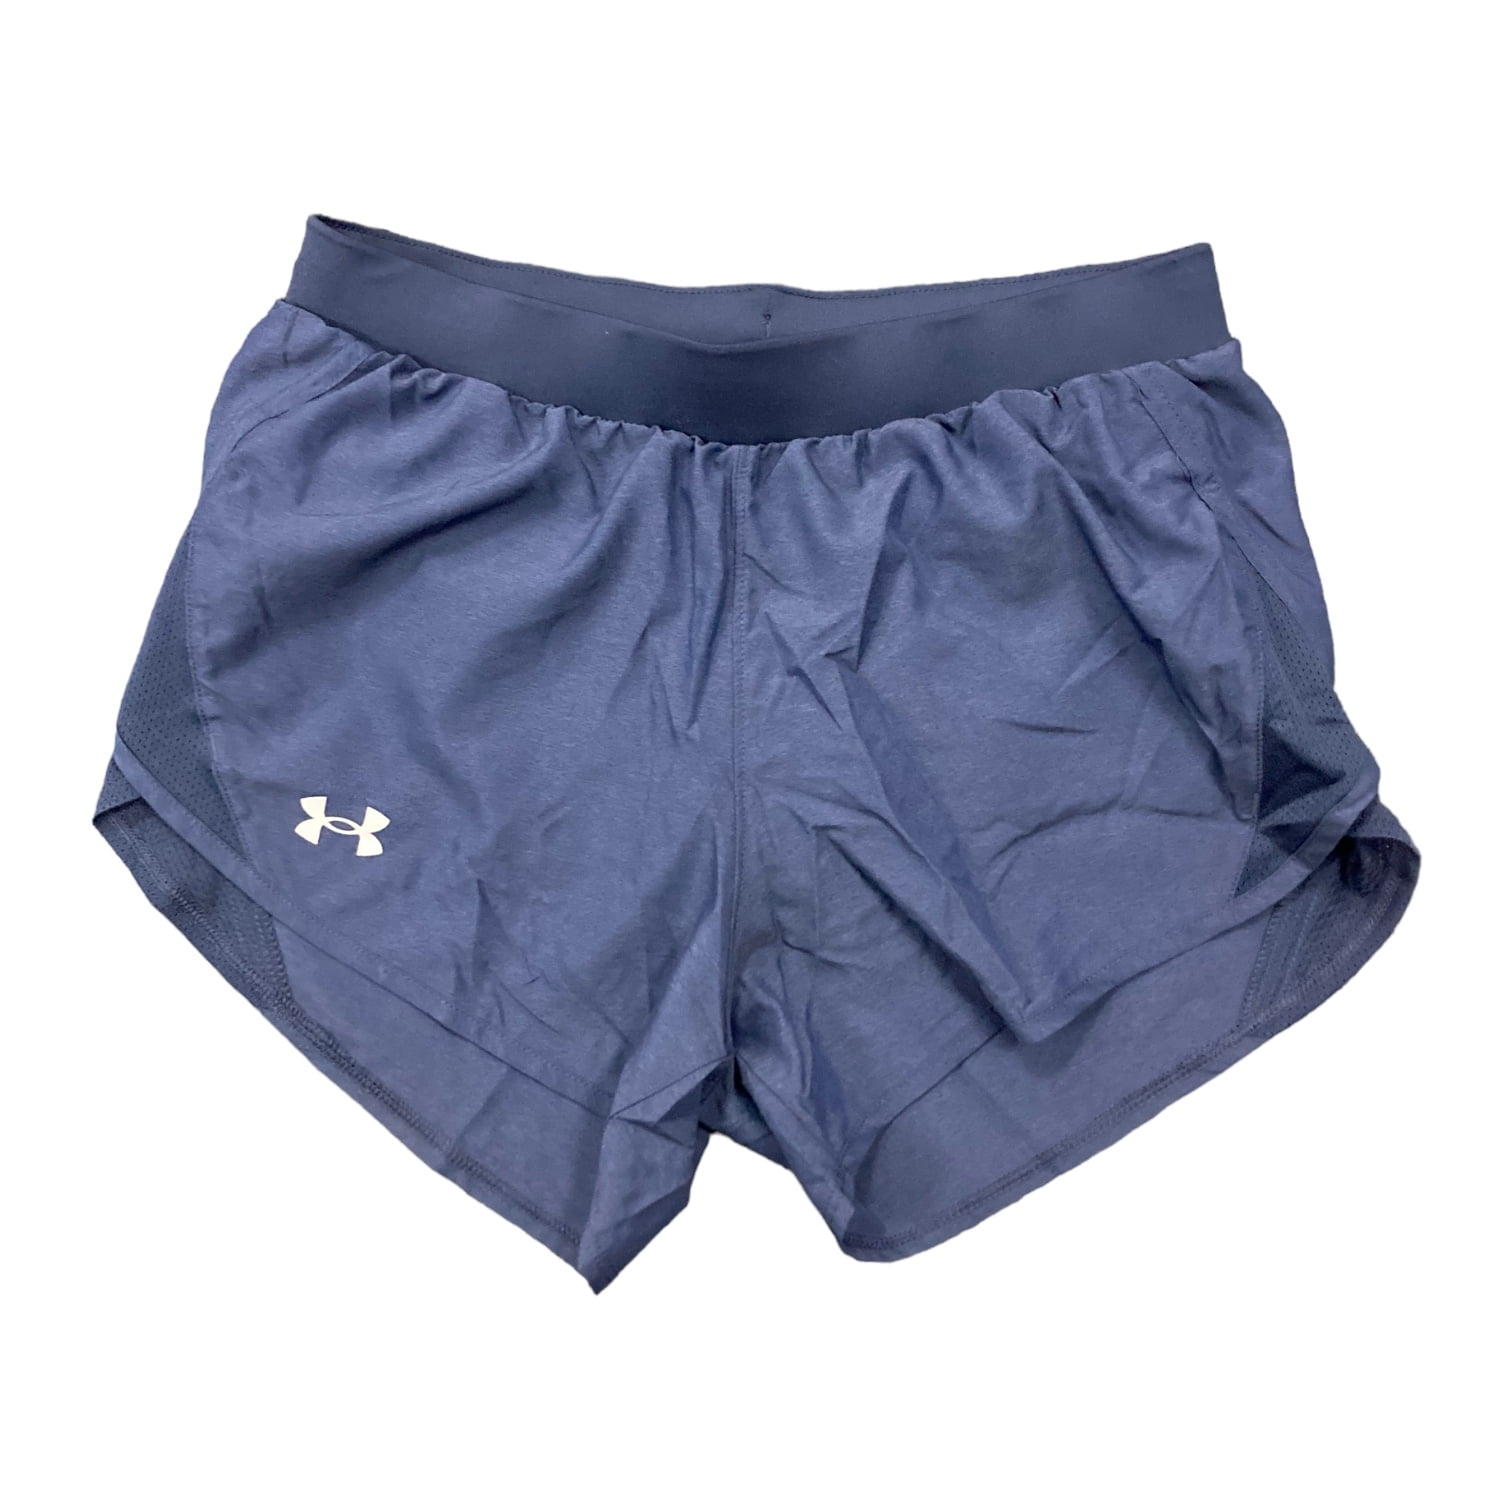  Under Armour Women's Fly By 2.0 Wordmark Running Shorts, Beta  (628)/Reflective, X-Small : Clothing, Shoes & Jewelry